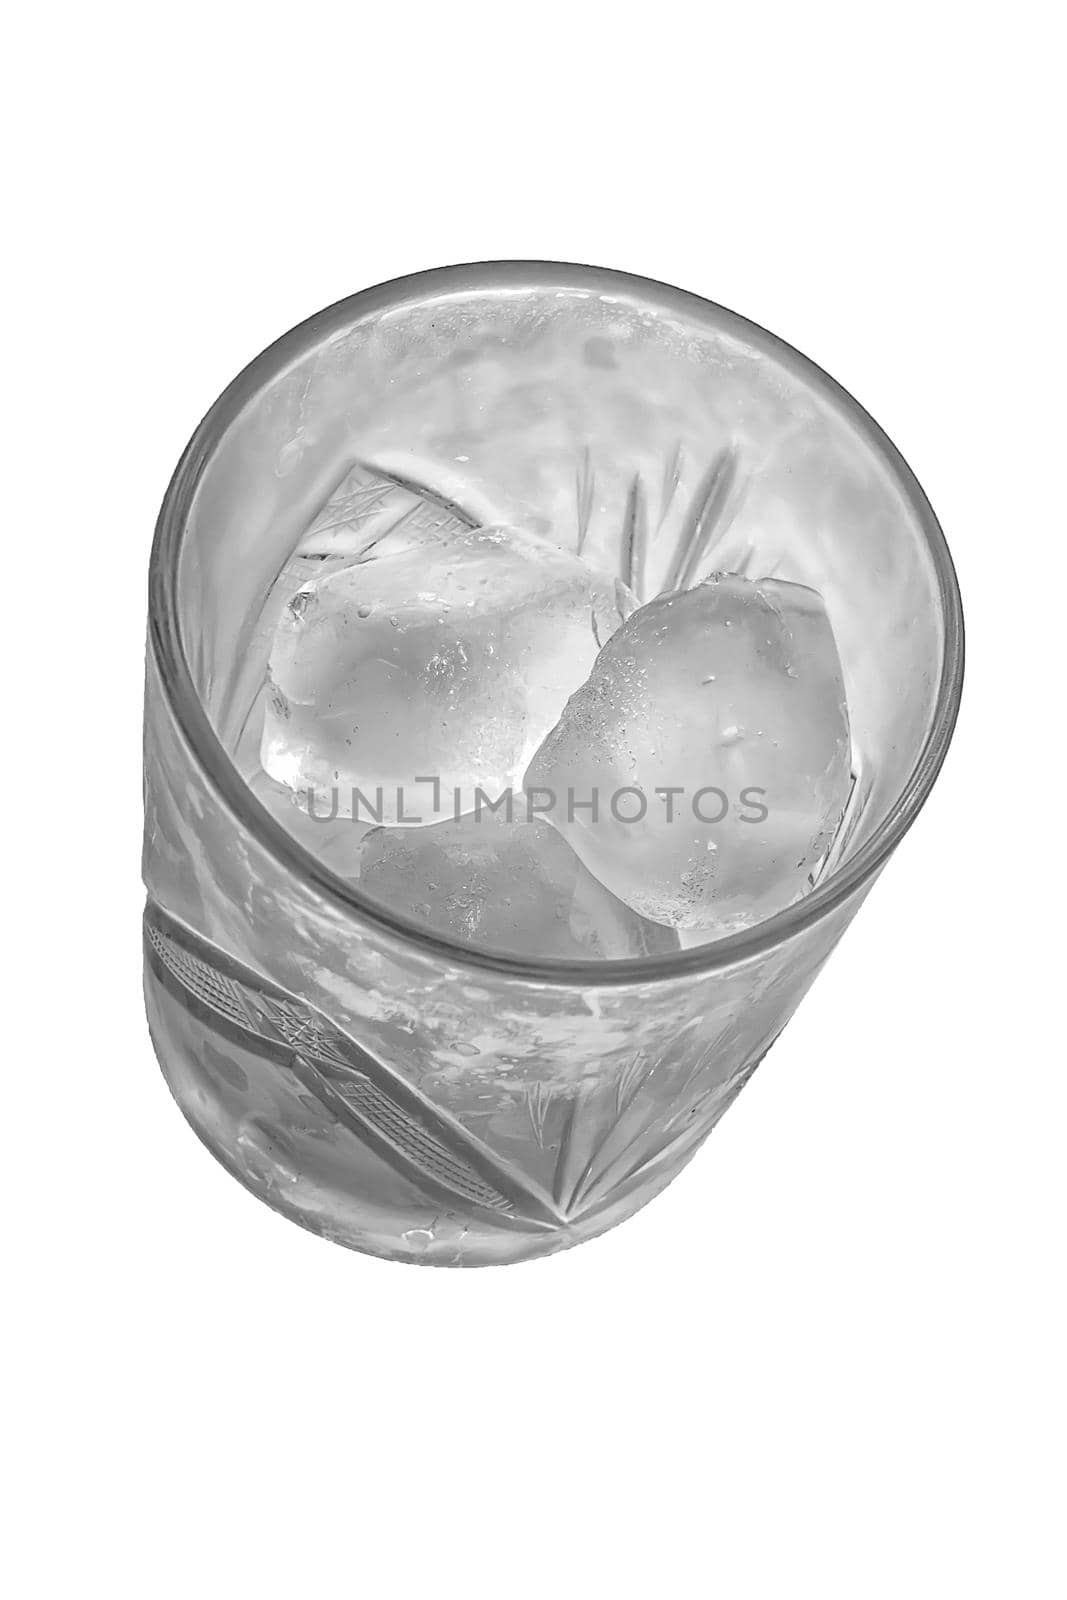 Black and white view of glass with ice cubes. Top view. Isolates